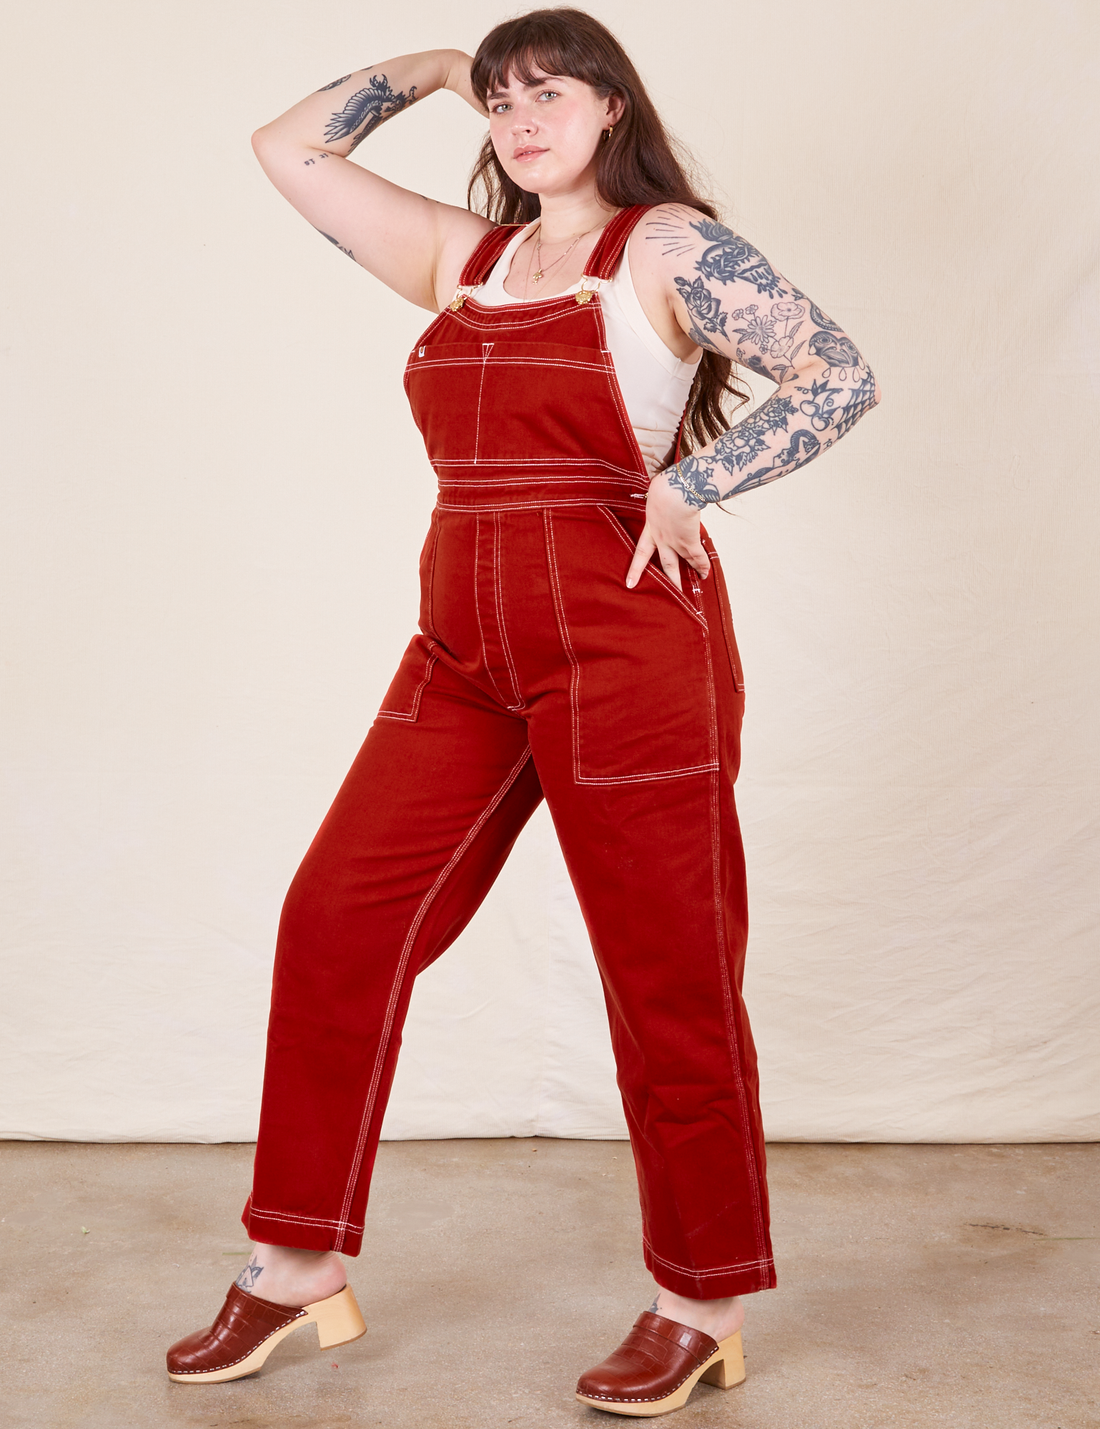 Sydney is 5'9" and wearing M Original Overalls in Paprika